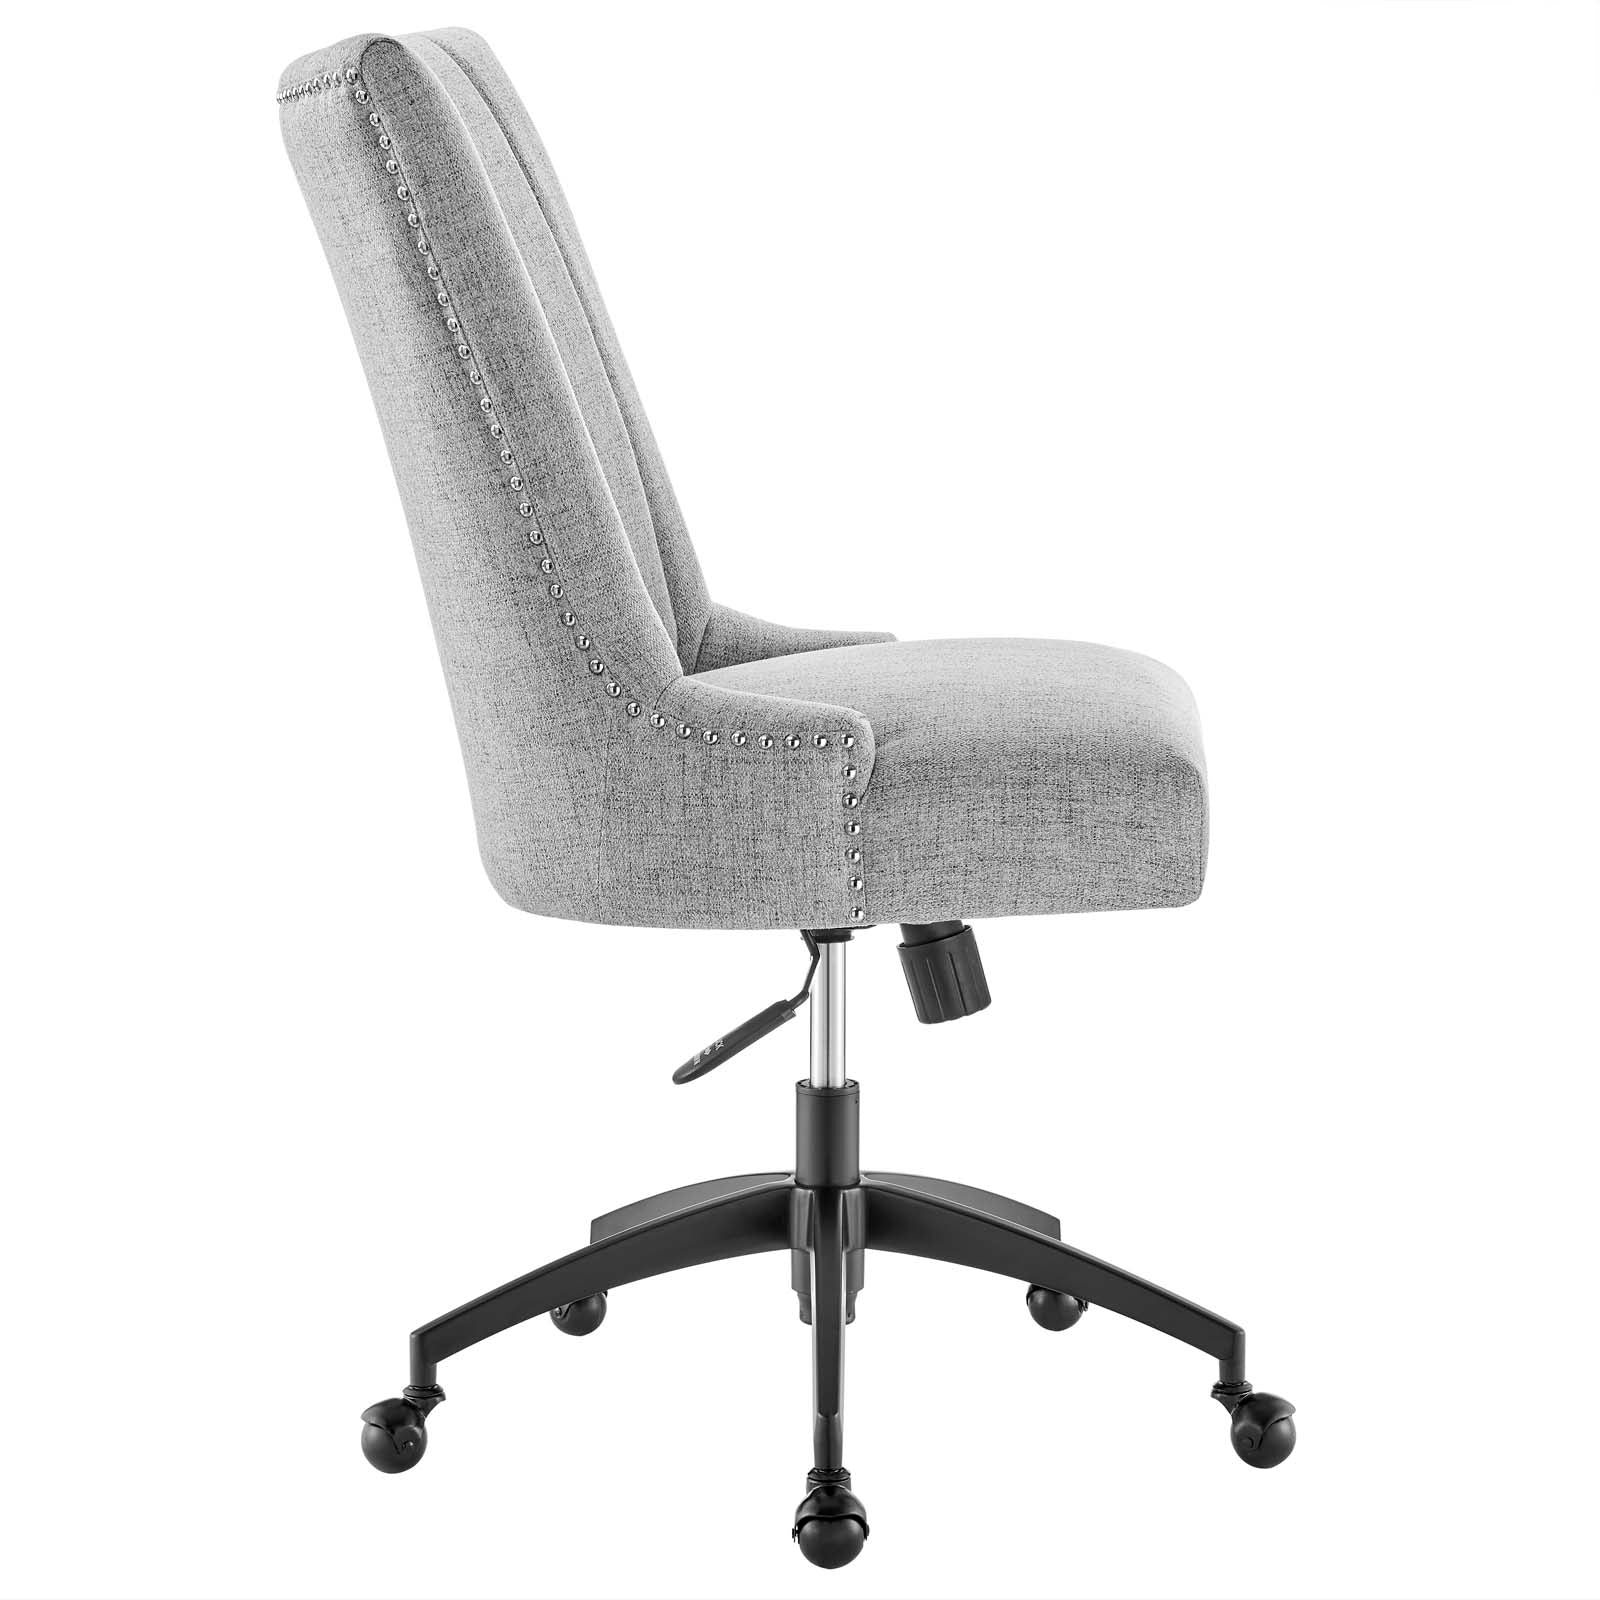 Modway Task Chairs - Empower Channel Tufted Fabric Office Chair Black Light Gray